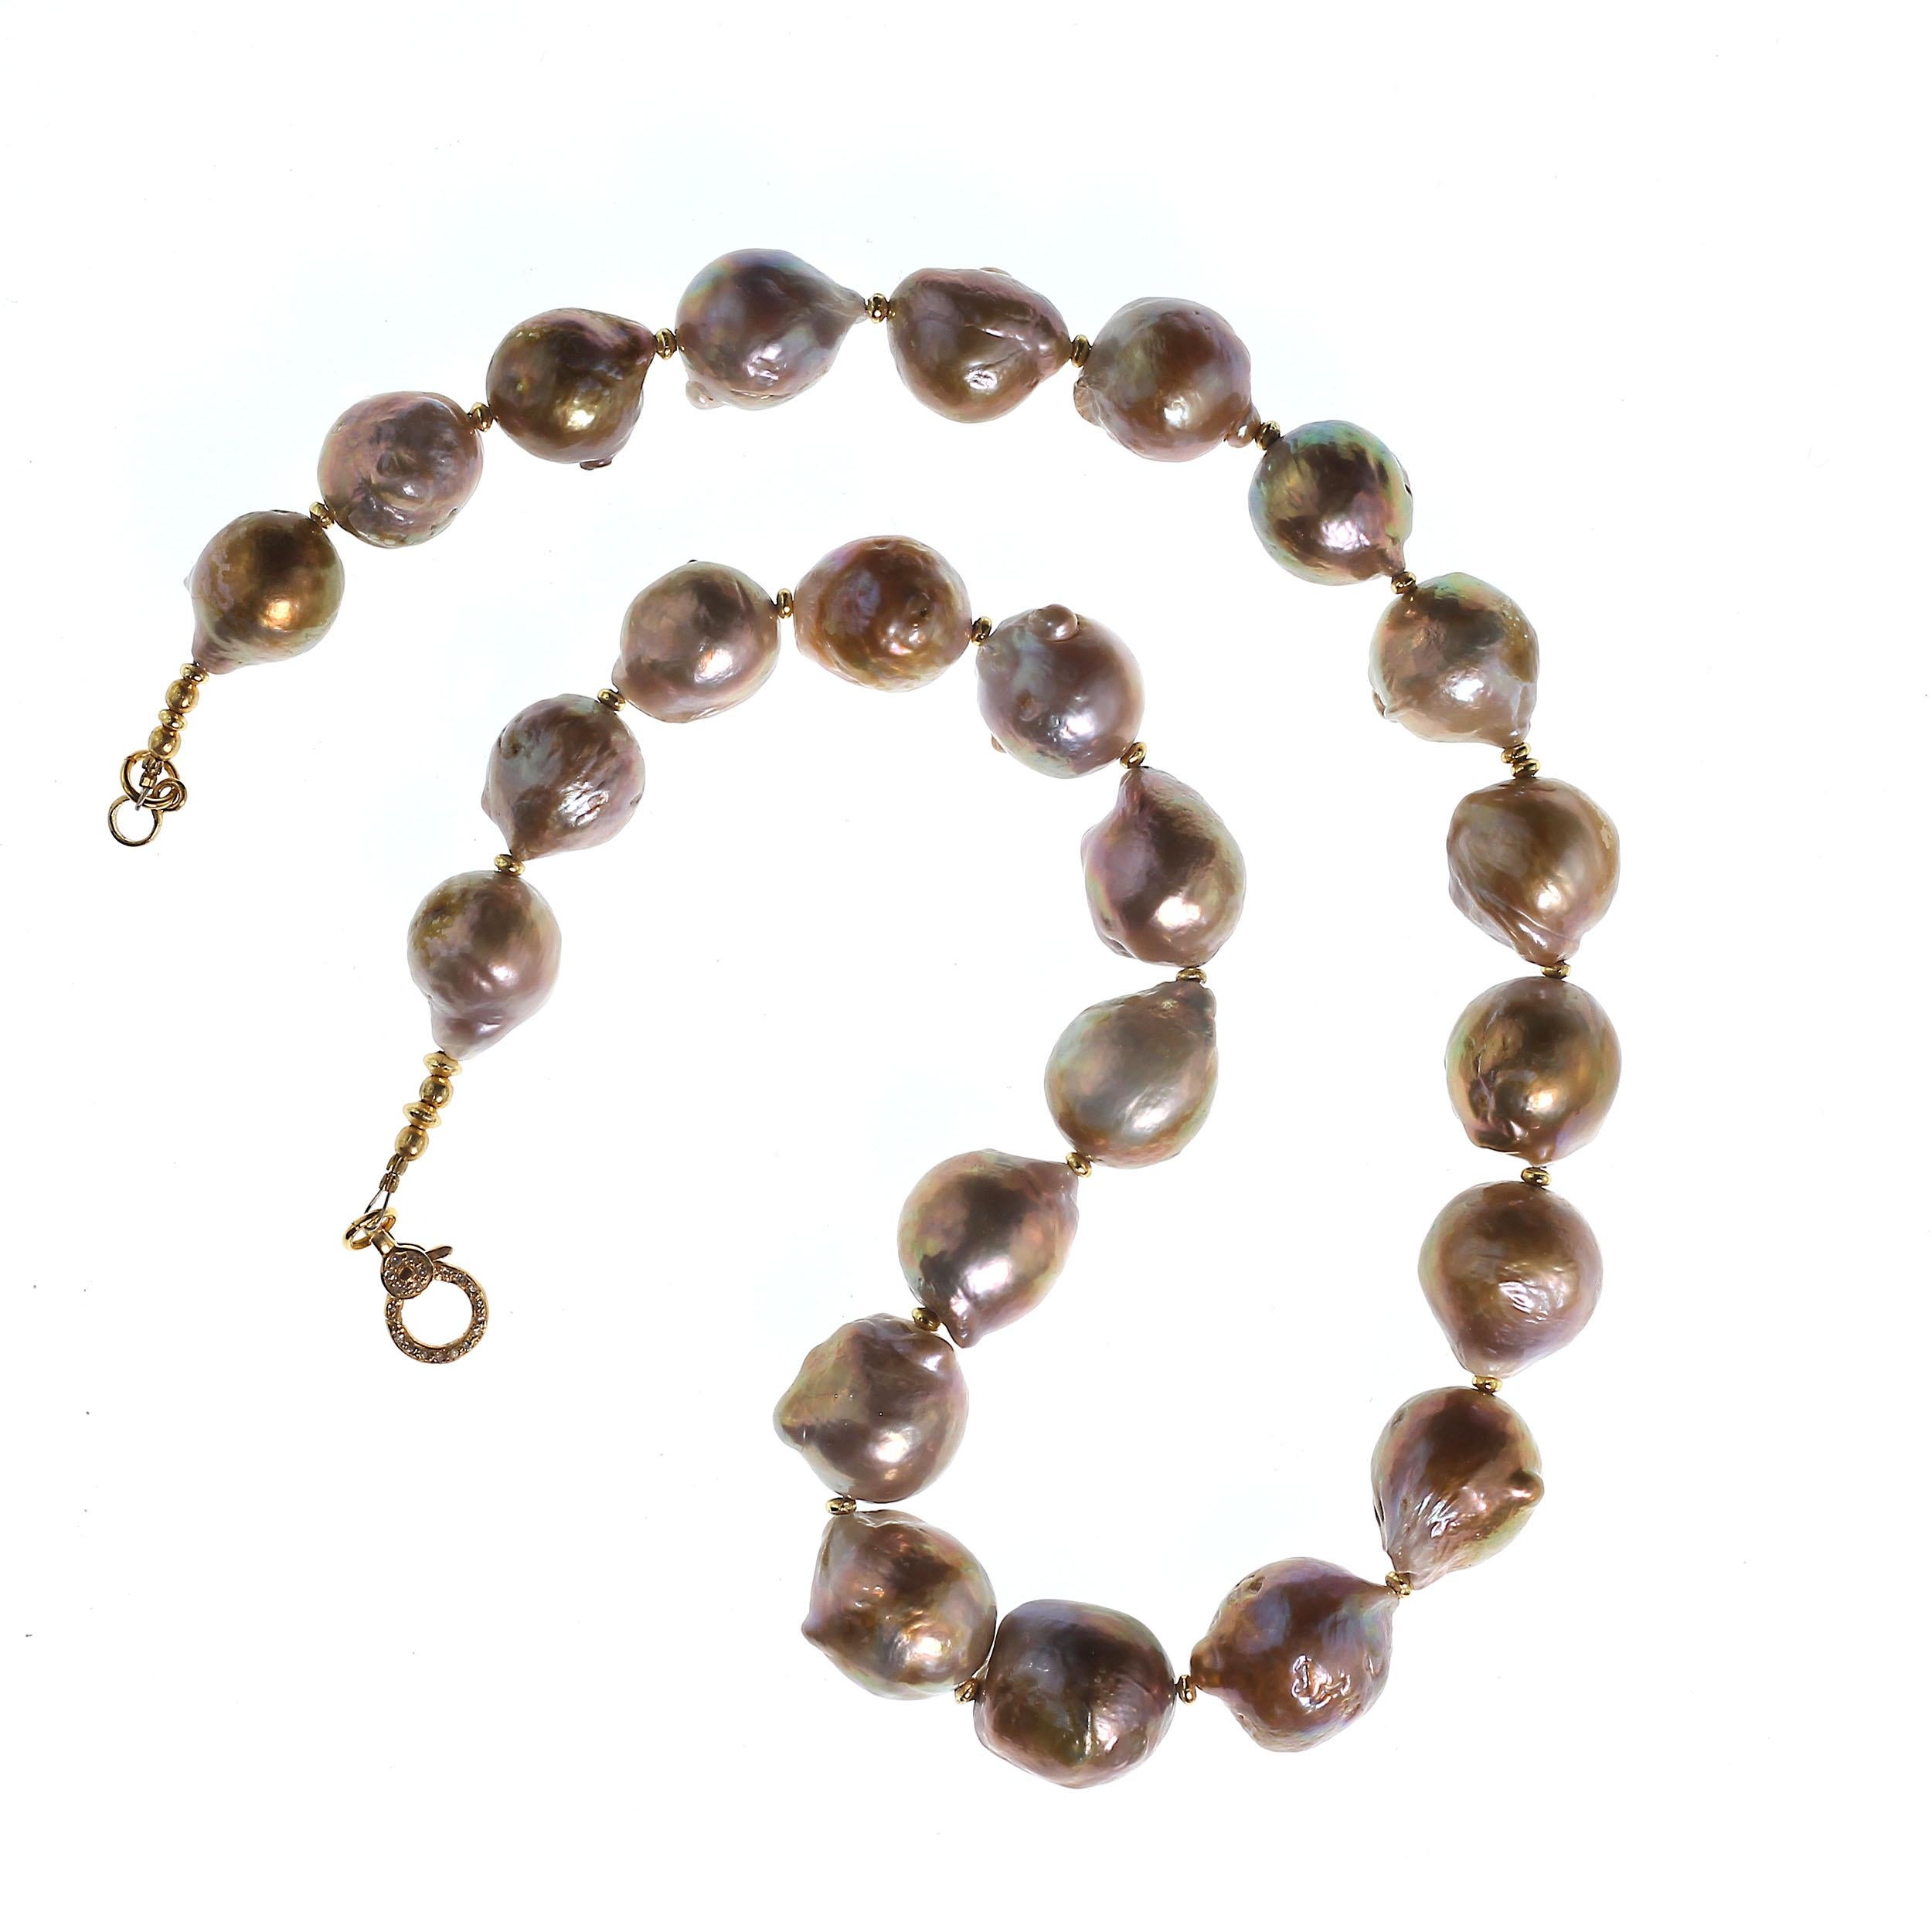 Bead Glamorous Iridescent Wrinkle Pearl Necklace from Gemjunky